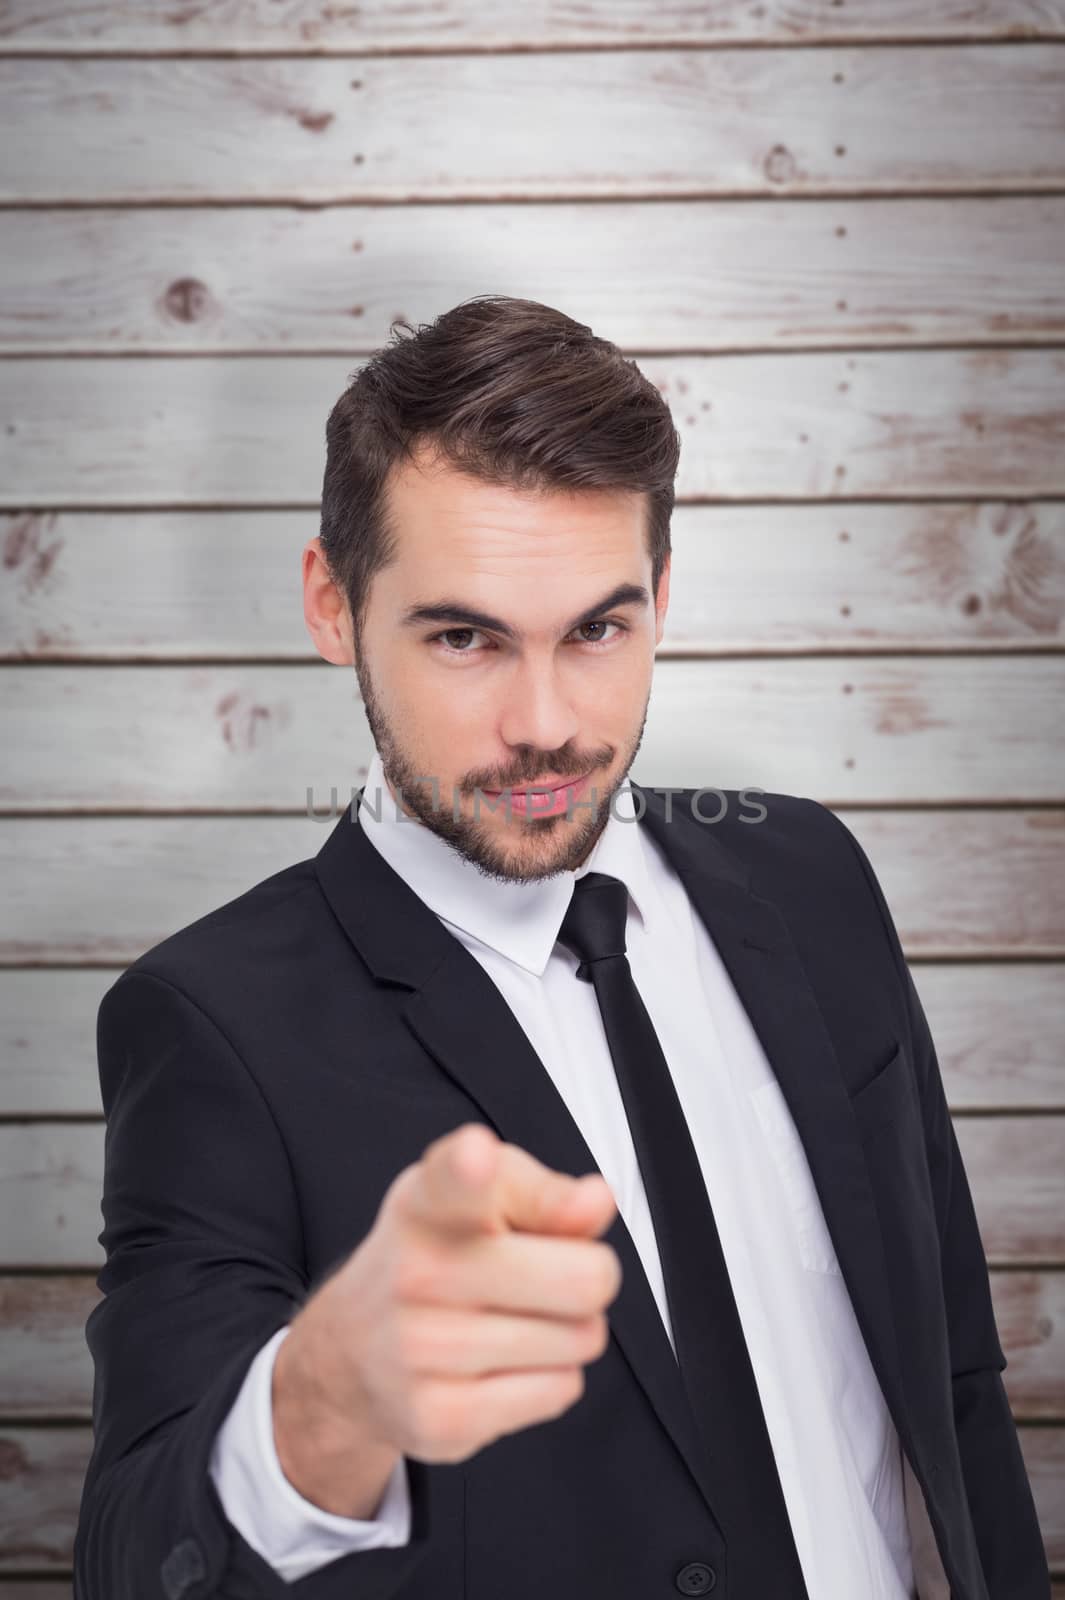 Smart businessman in suit pointing at camera against wooden planks